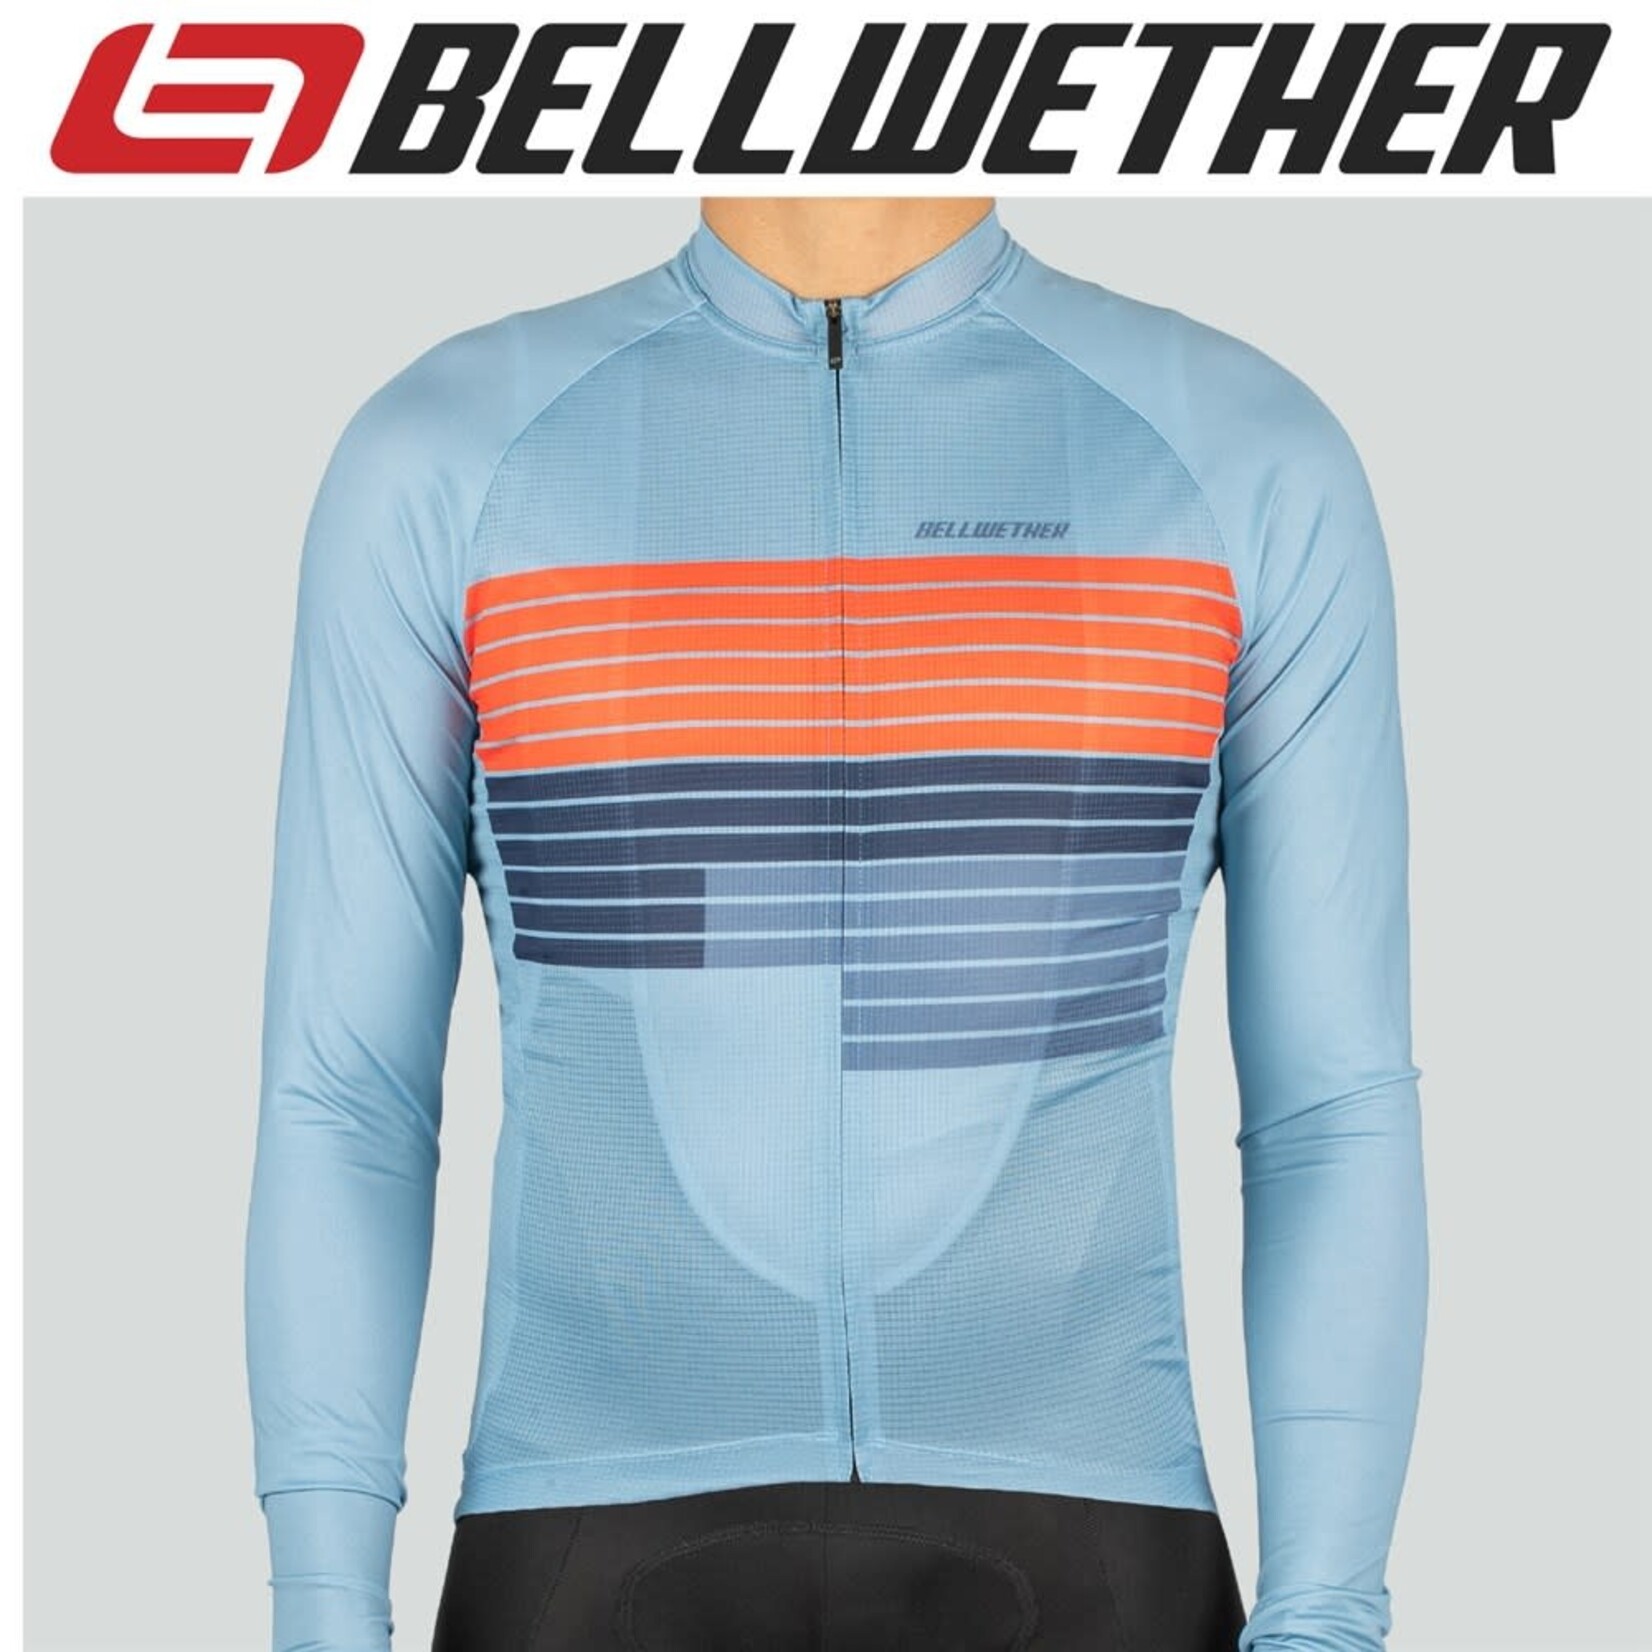 Bellwether Bellwether Sol-Air UPF 40+ Mens L/S Jersey Ice Grey